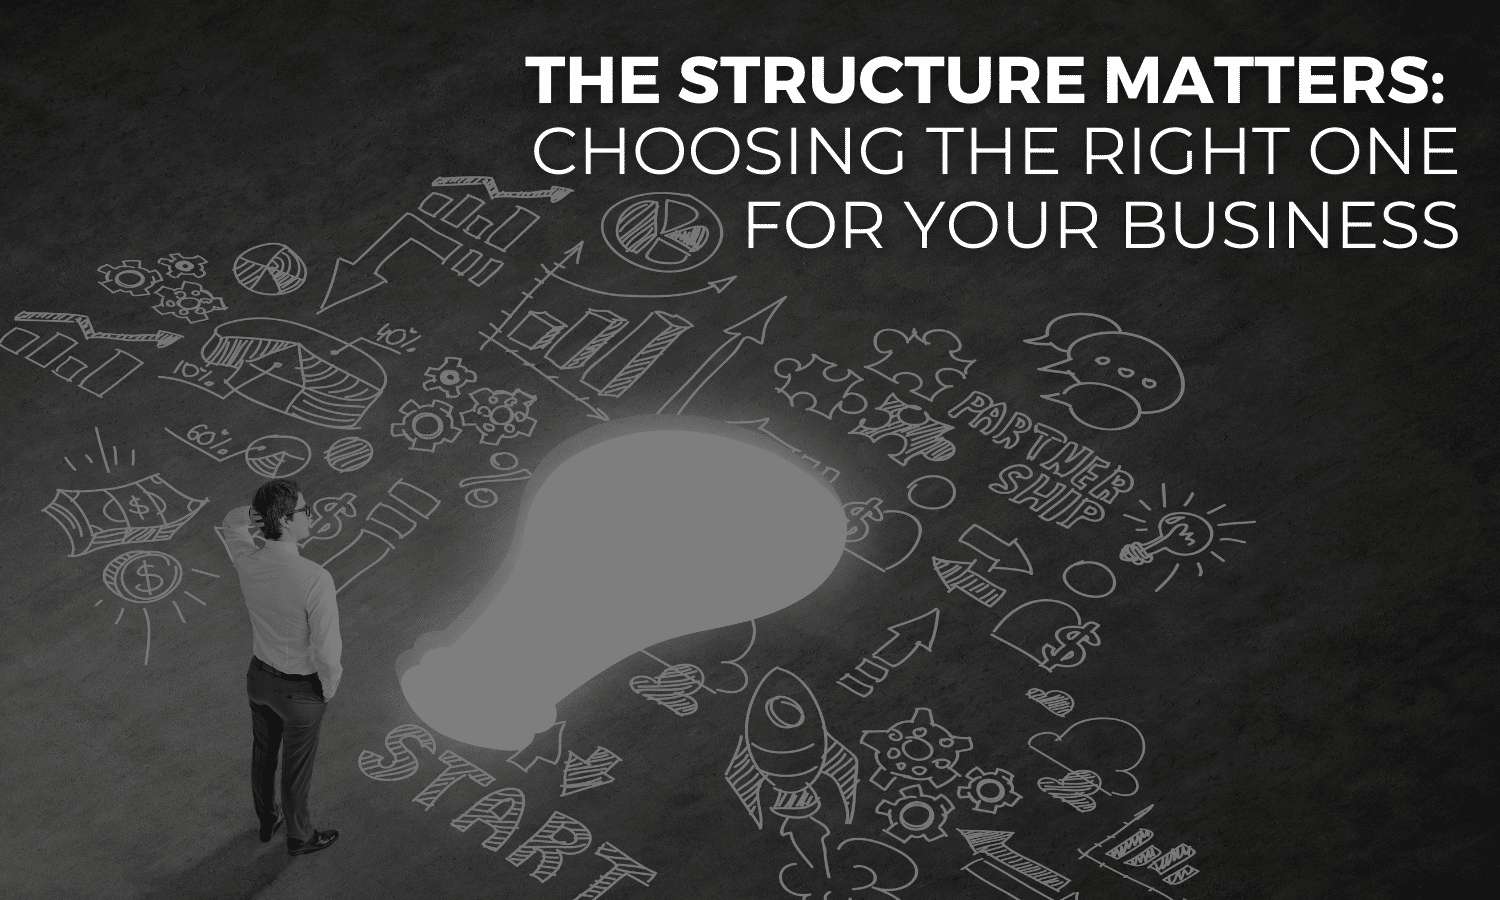 What business structure should I choose?